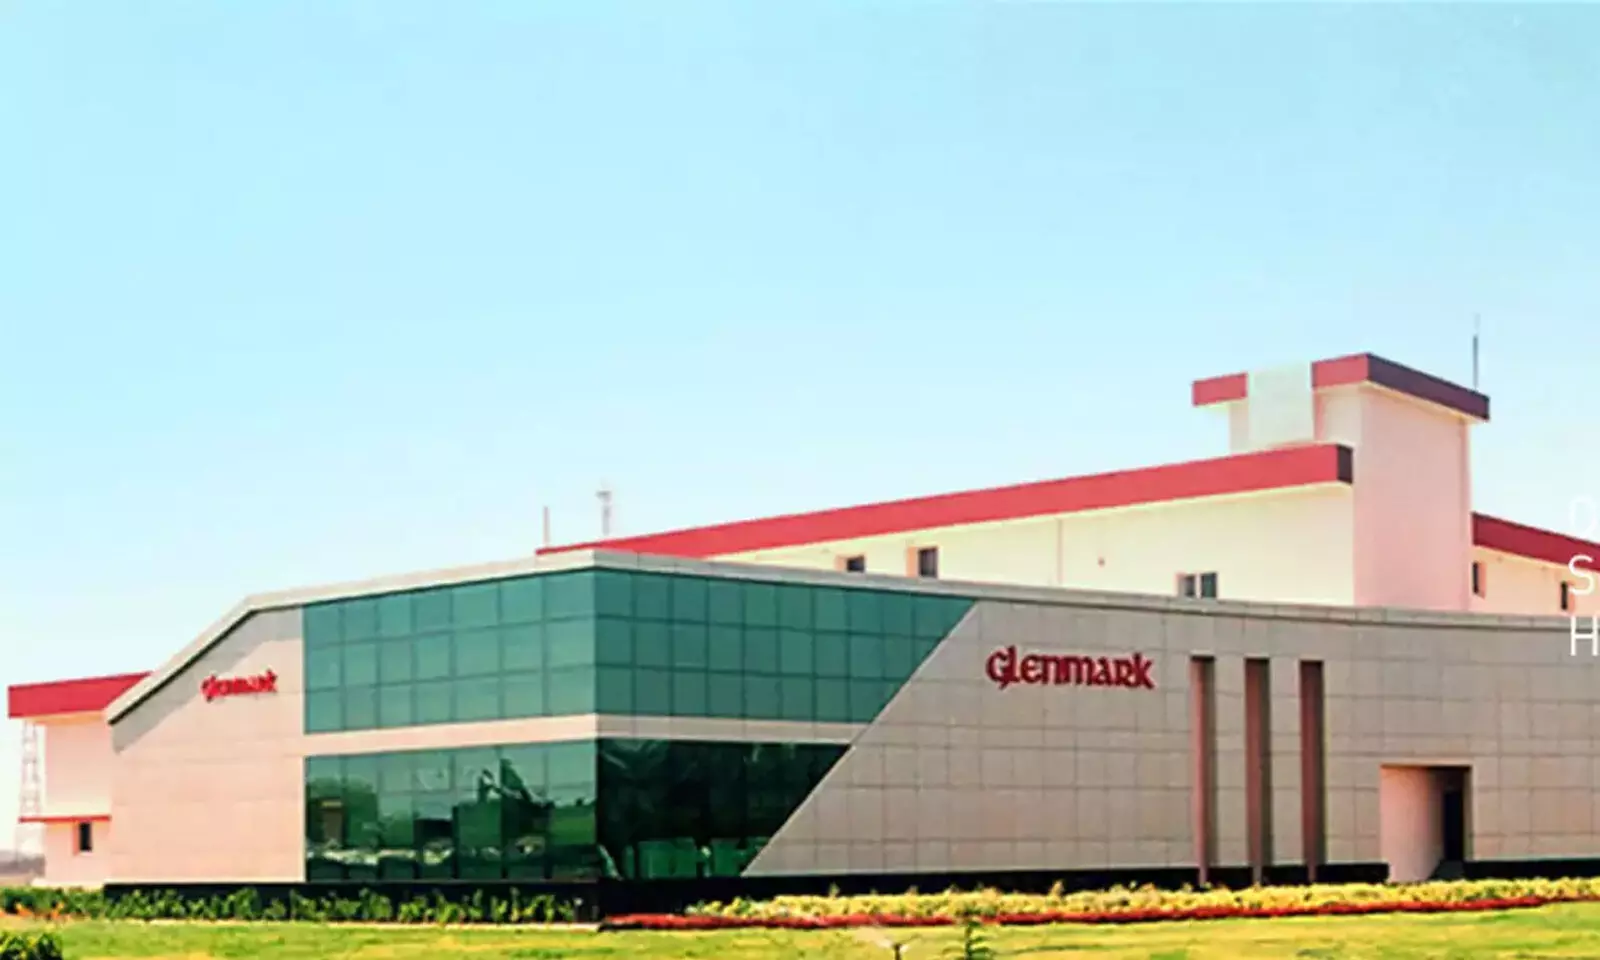 Glenmark to use Rs 296 crore loan for debt refinance, capex